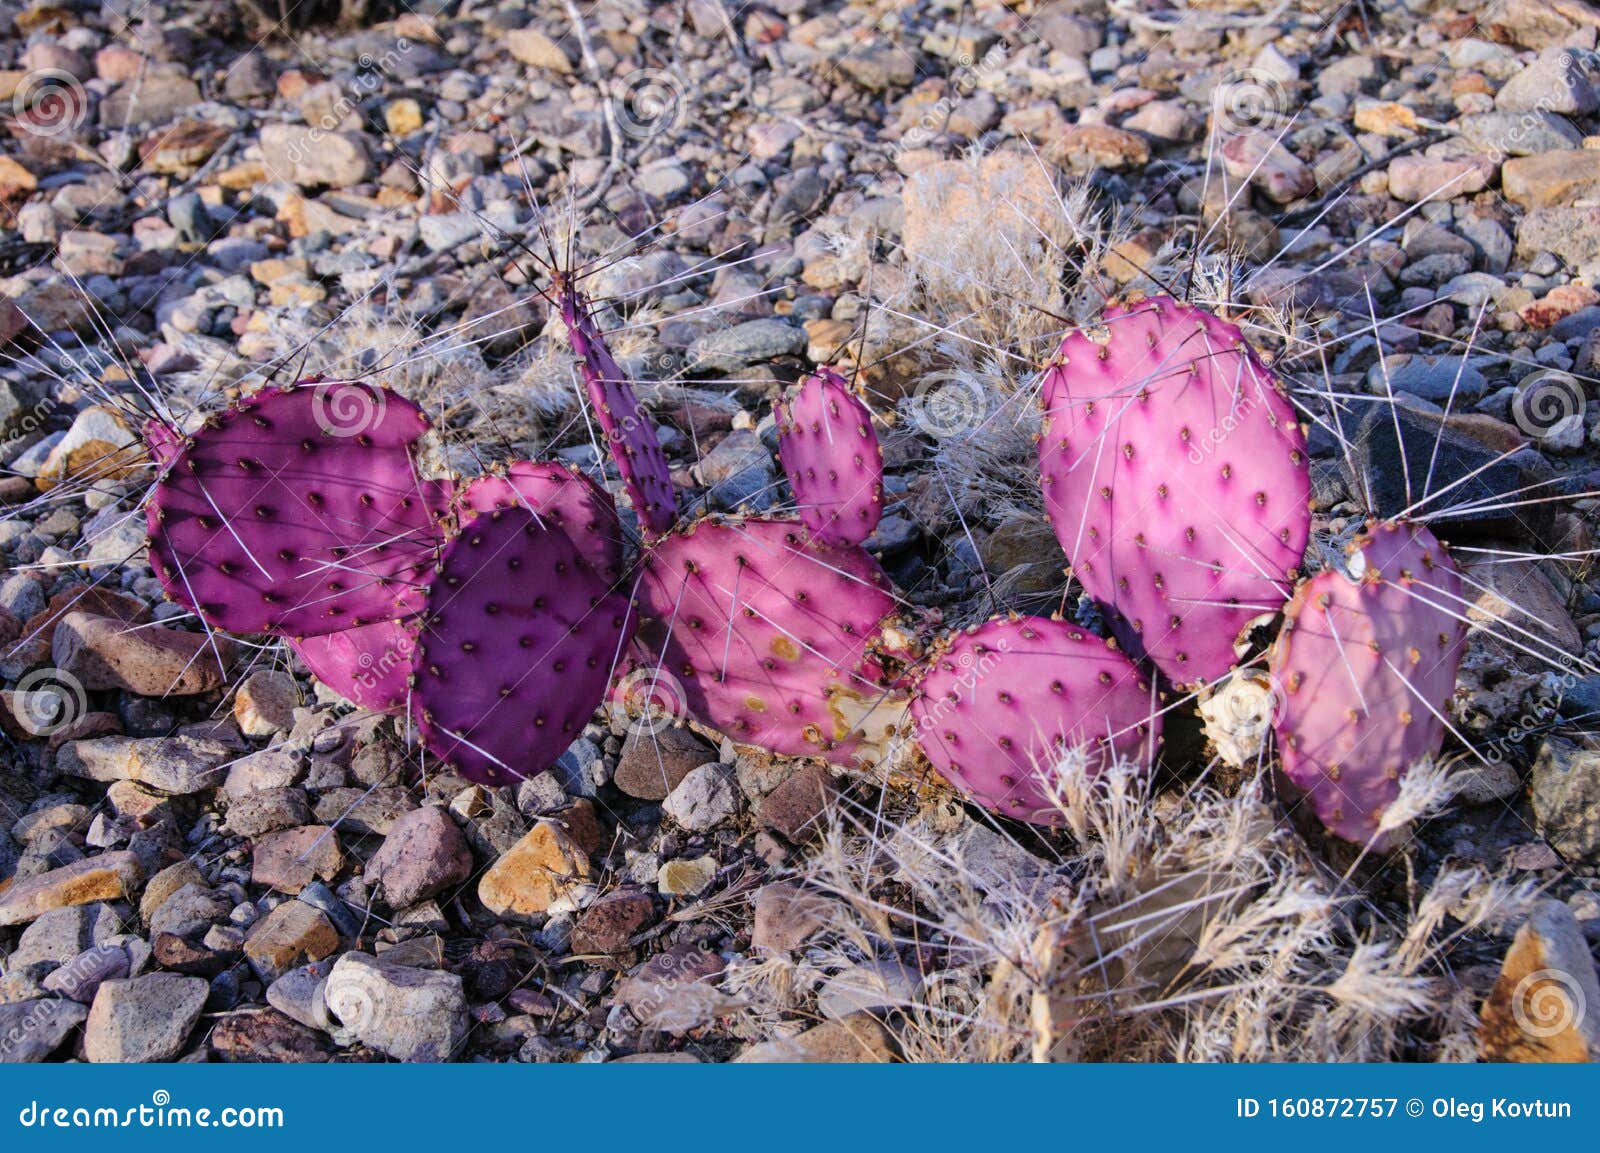 Opuntia Macrocentra Purple Prickly Pear Cactus Stock Image Image Of Life Colorful 160872757